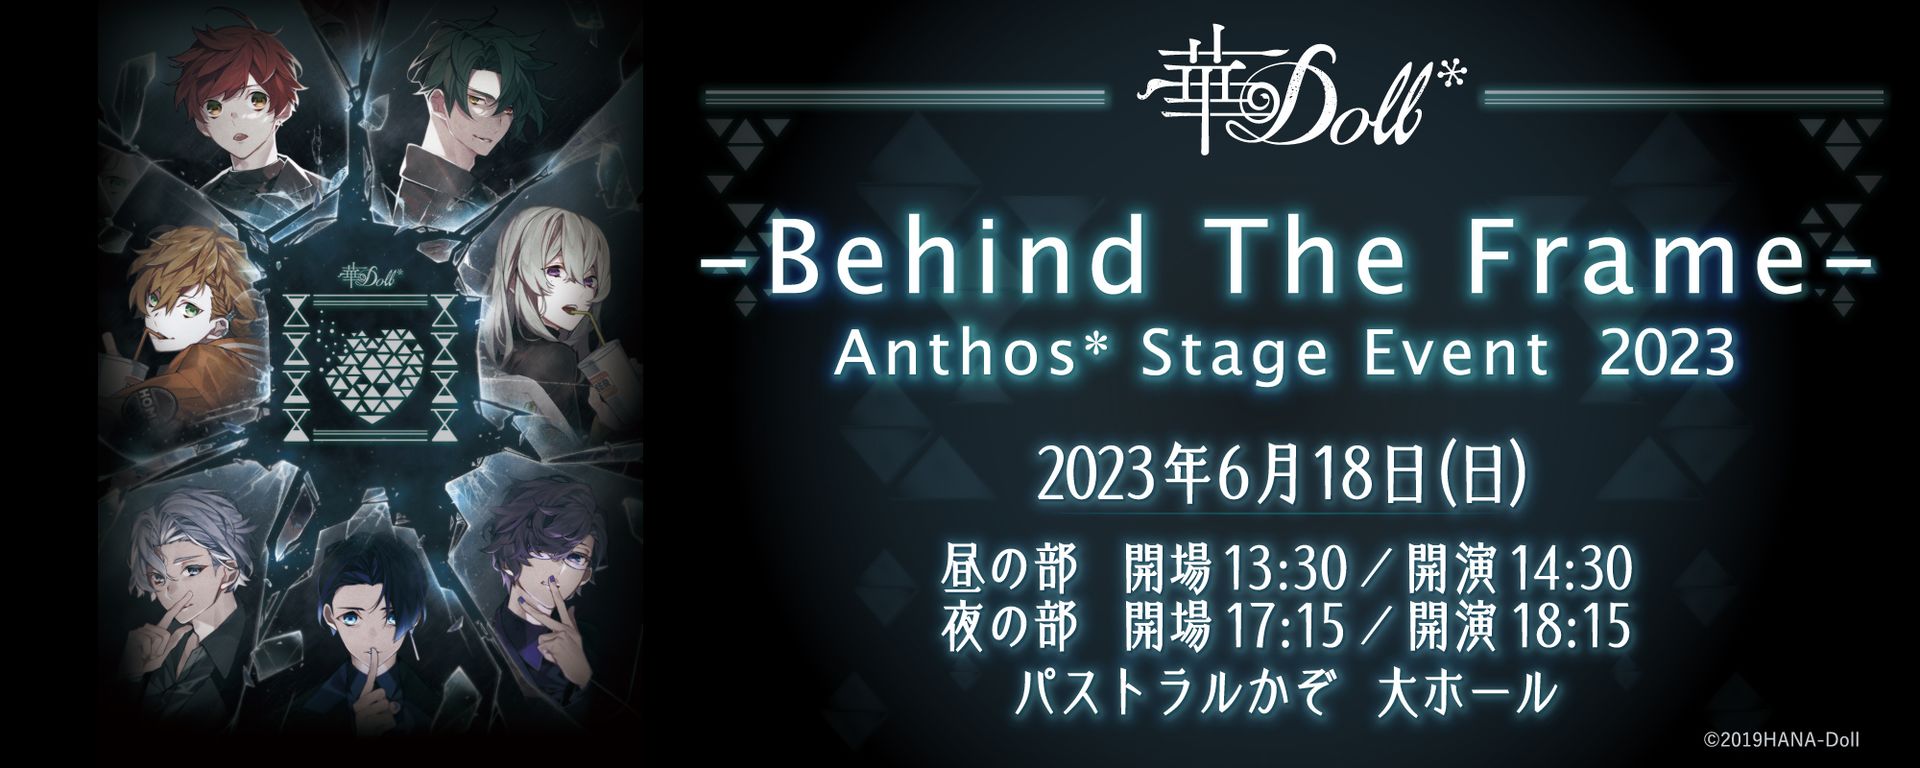 [Streaming+] 華Doll* -Behind The Frame- Anthos* Stage Event 2023